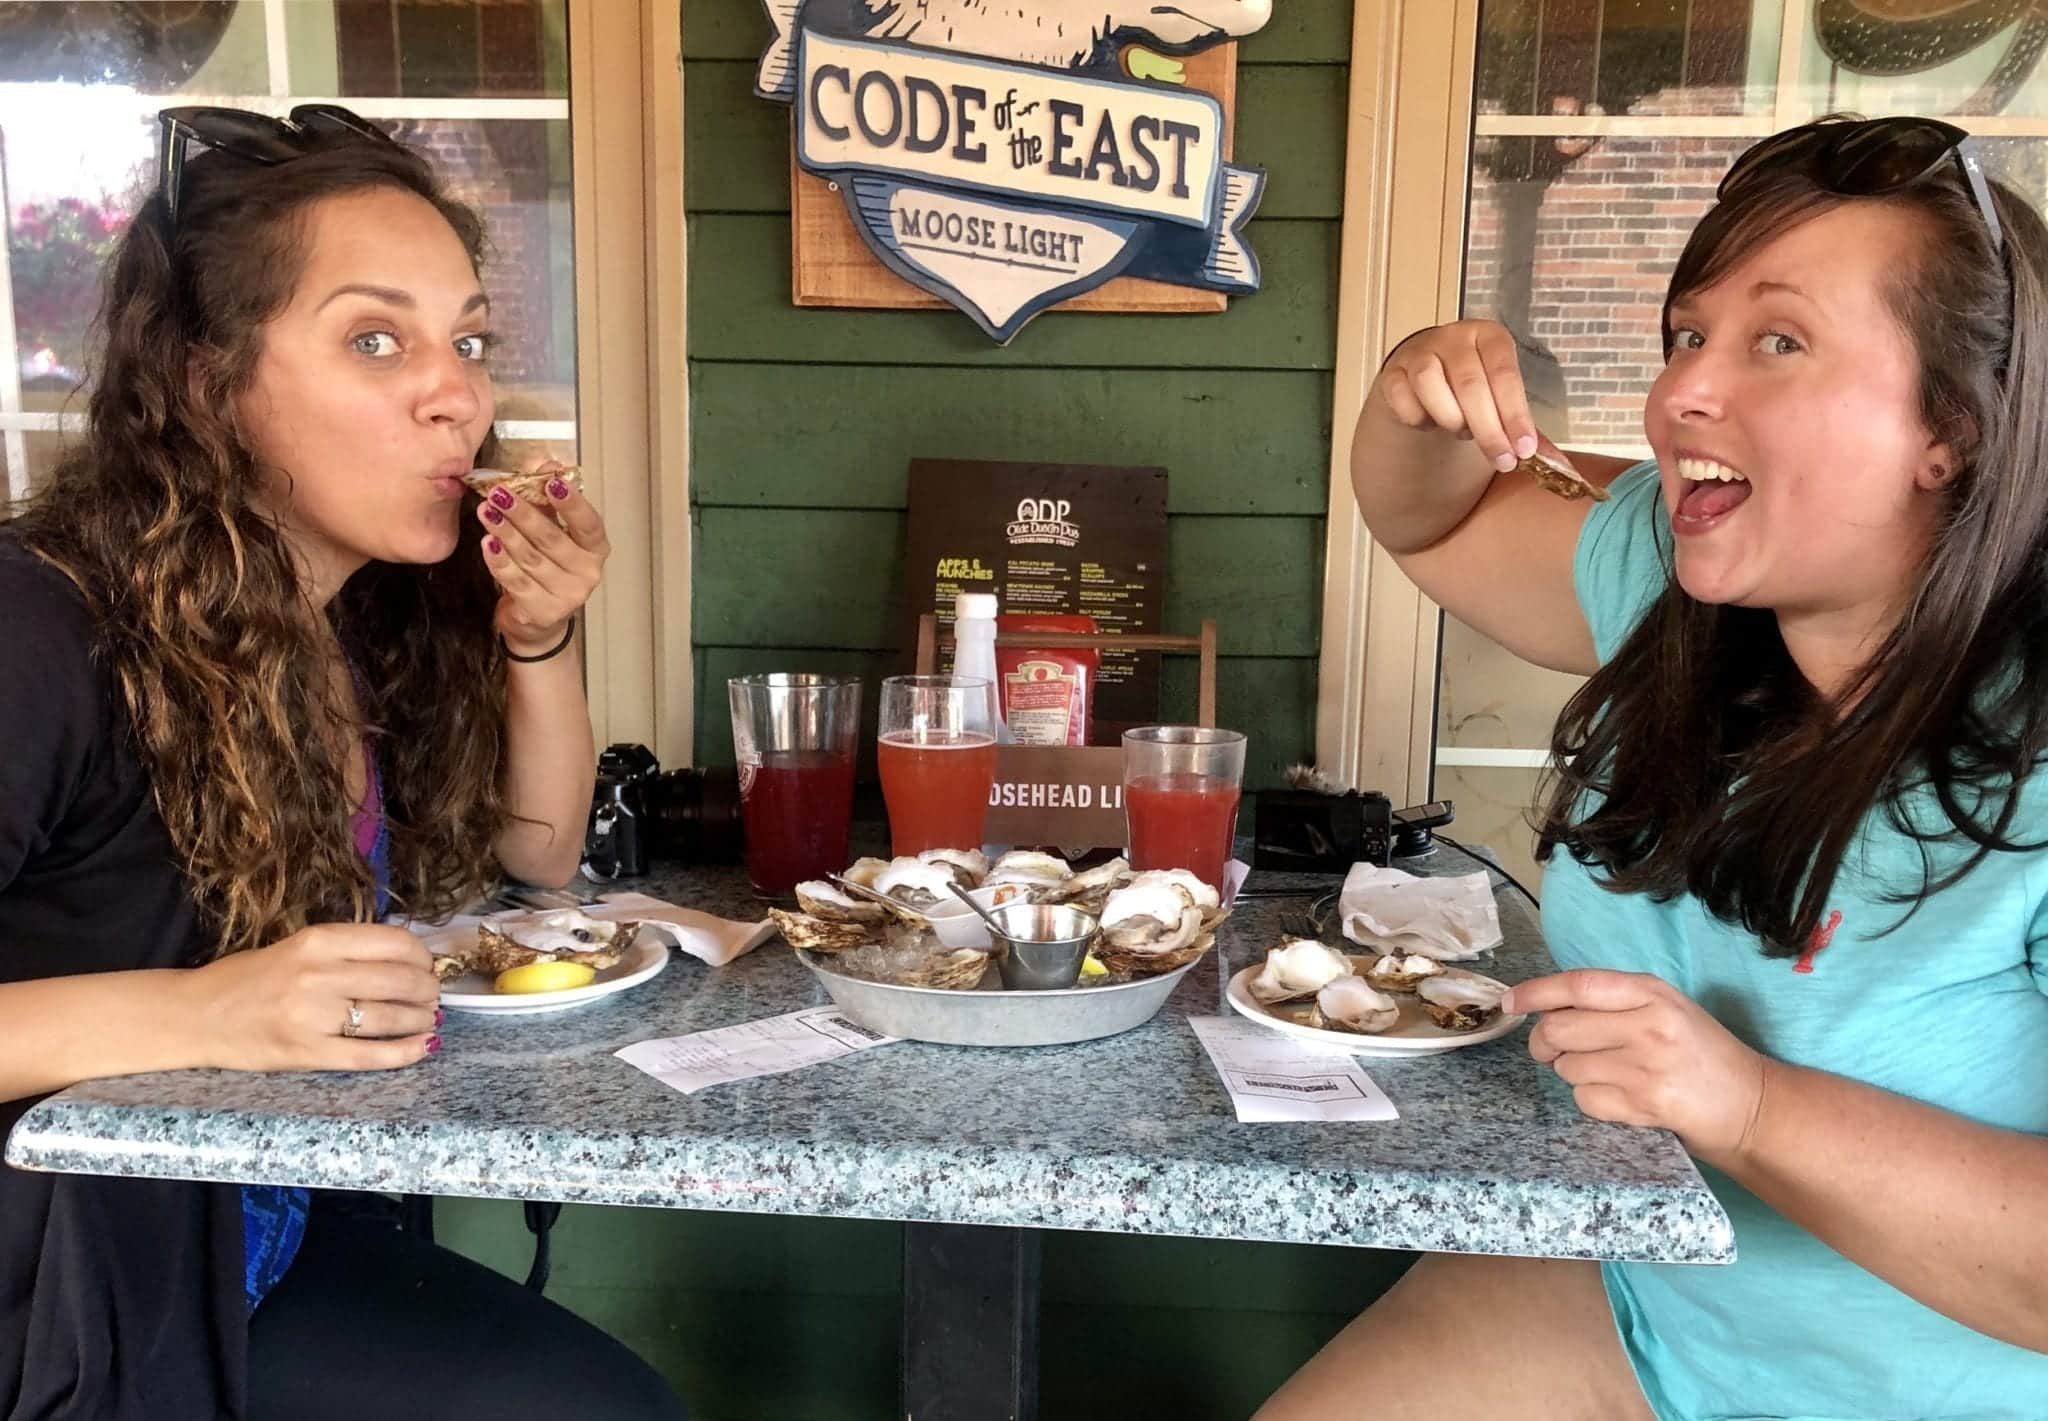 Kate and Cailin pause while eating a plate of 24 oysters at an Irish bar in PEI